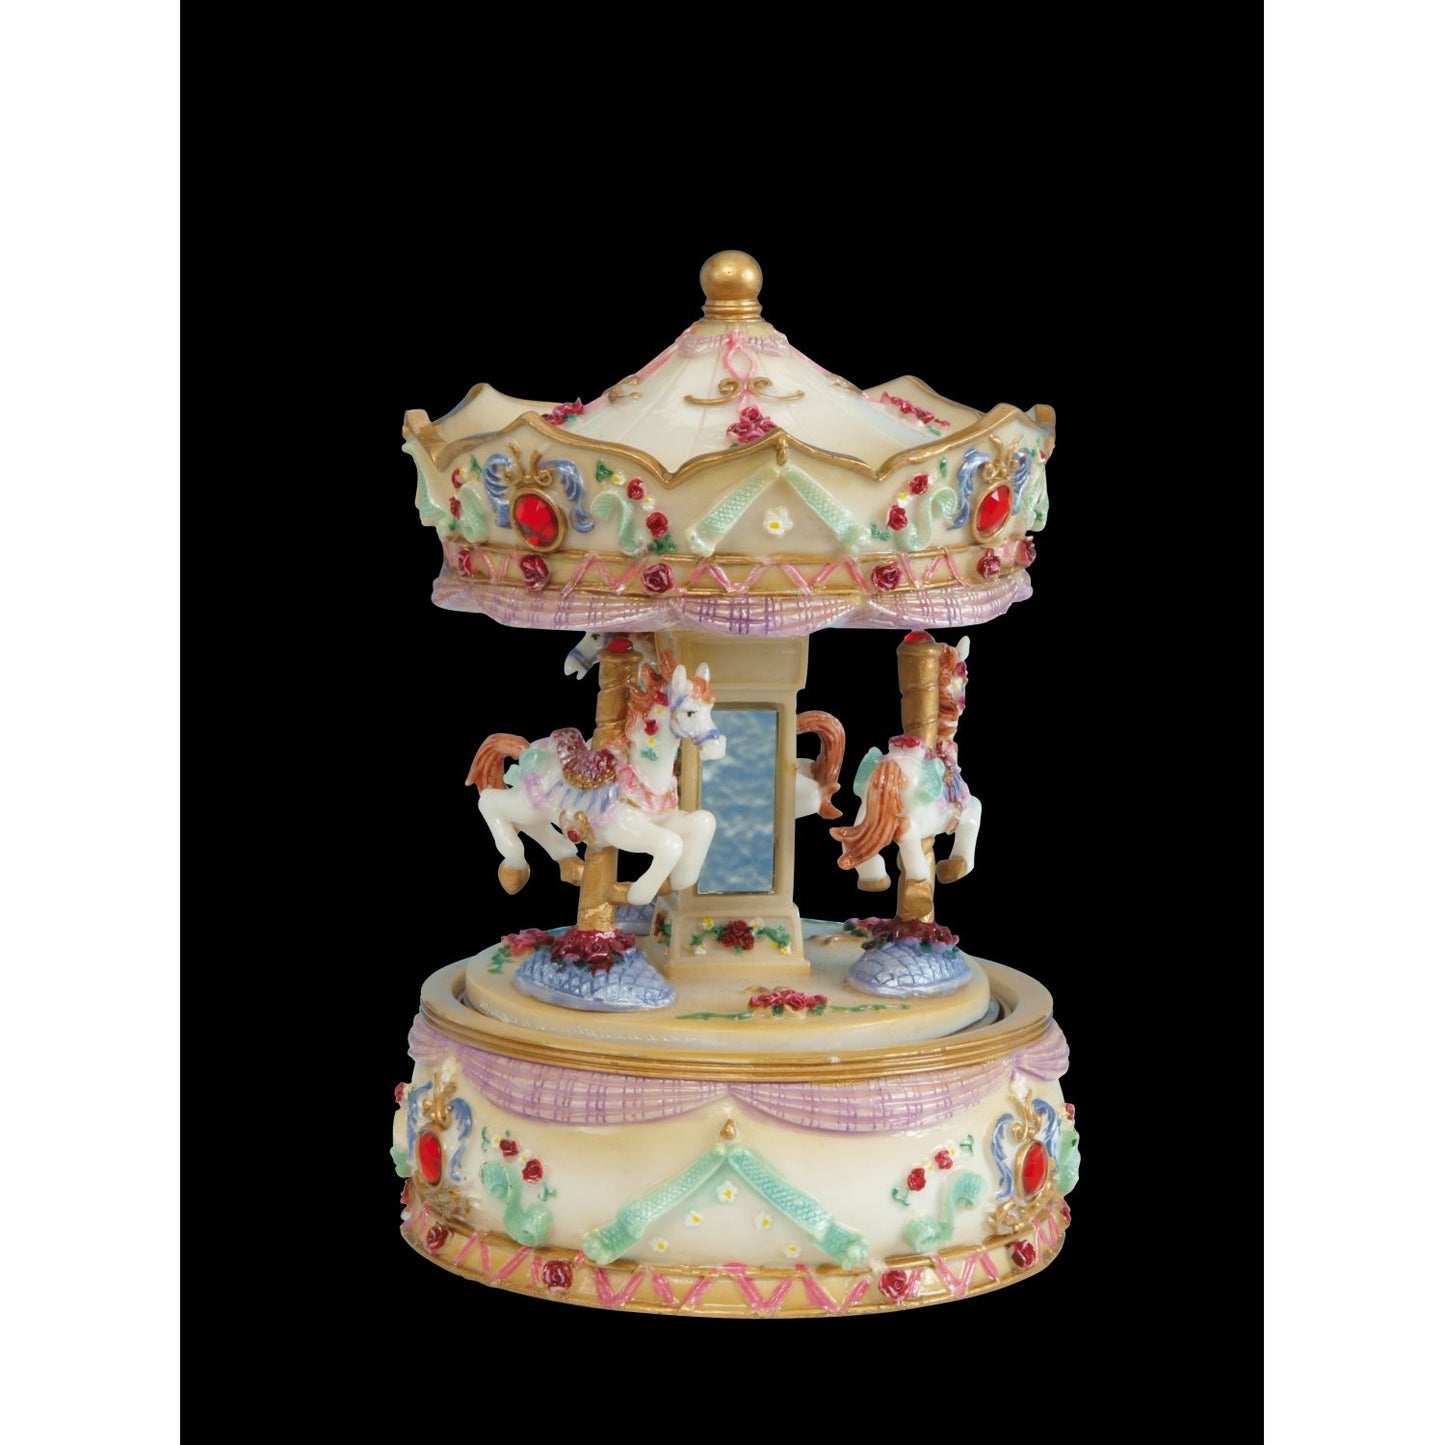 Musicbox Kingdom 6.3" Beige Carousel Turns To A Famous Melody